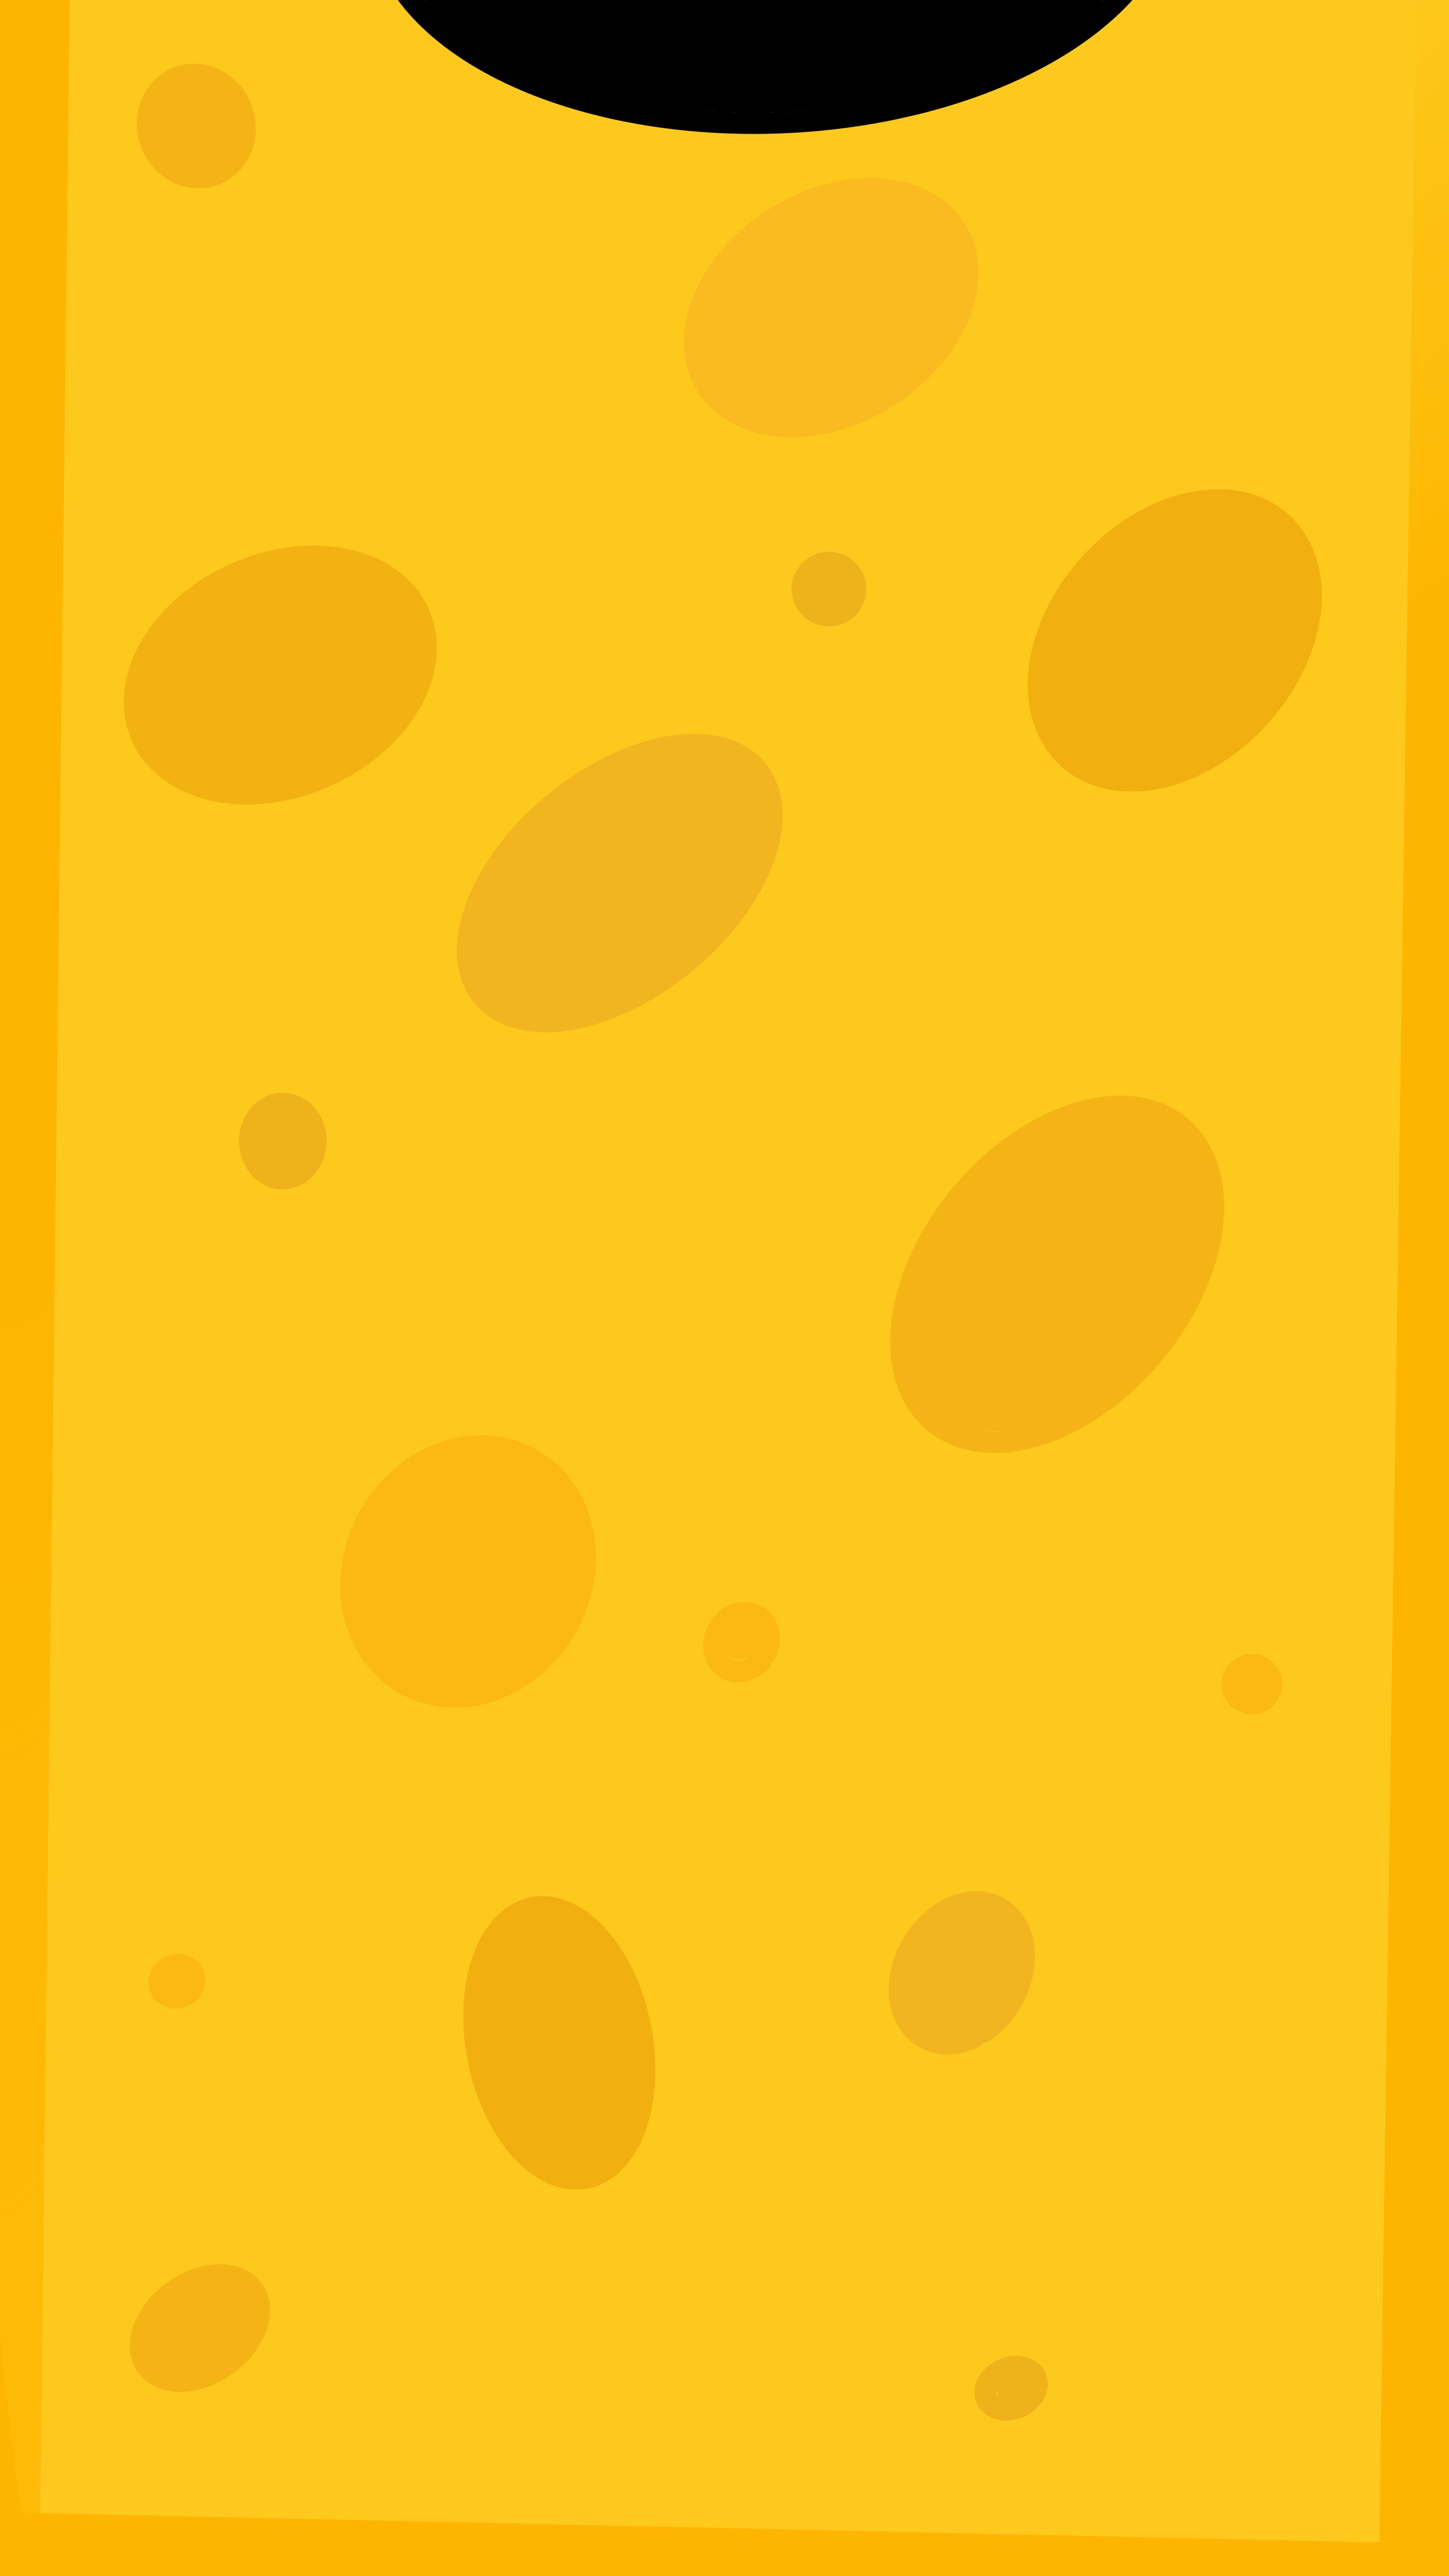 83059 download wallpaper textures, cheese, yellow, texture screensavers and pictures for free